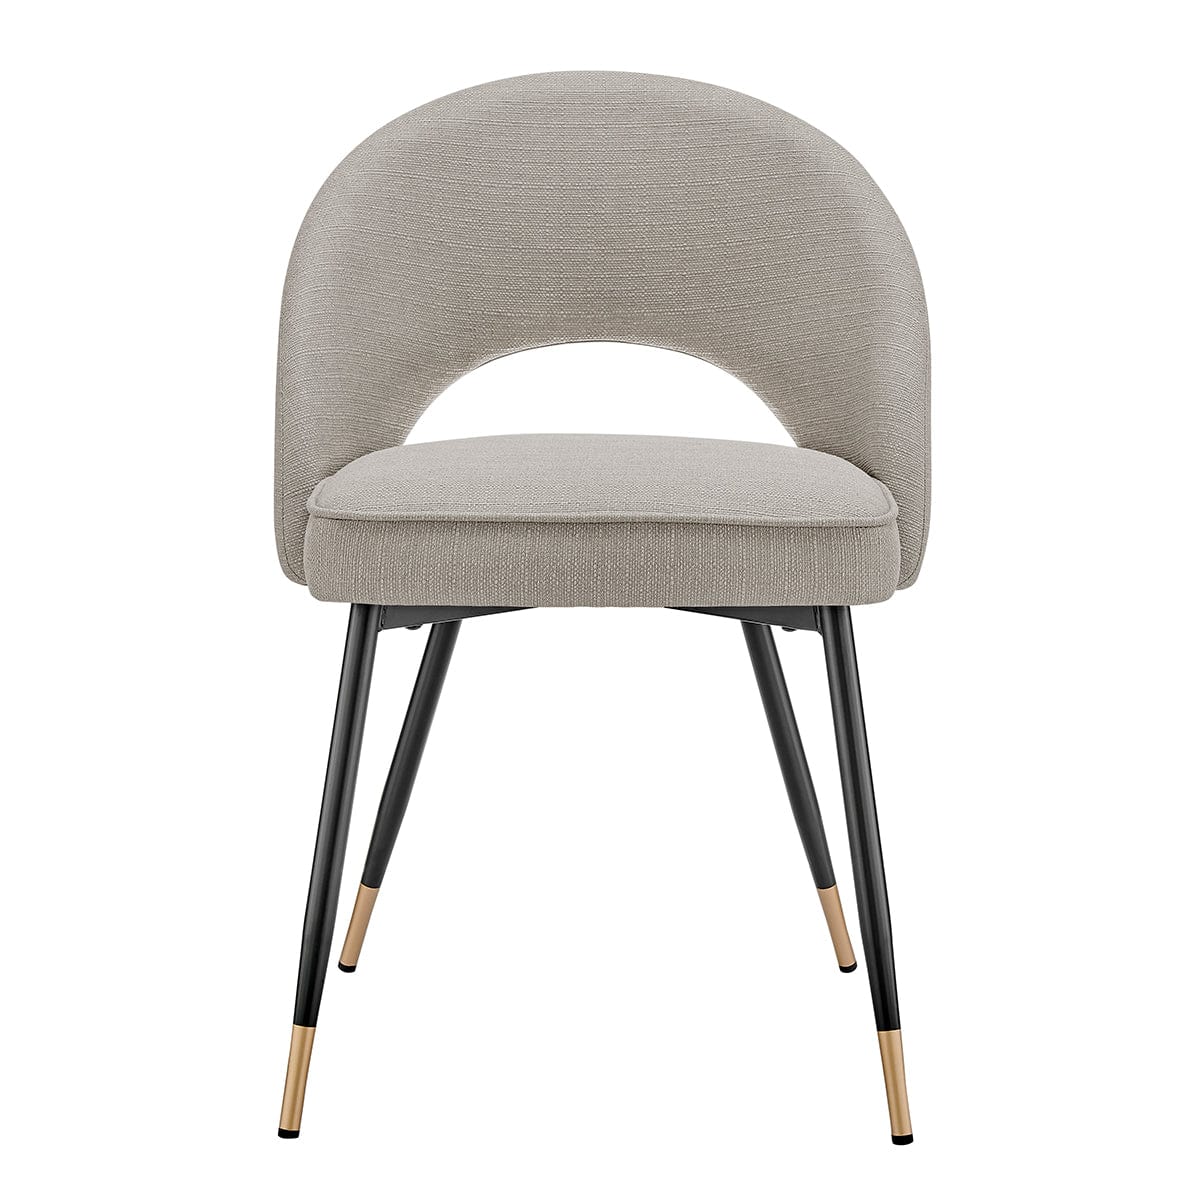 Lola Set of 2 Dining Chairs - Linen Look - Stone Grey - DUSK